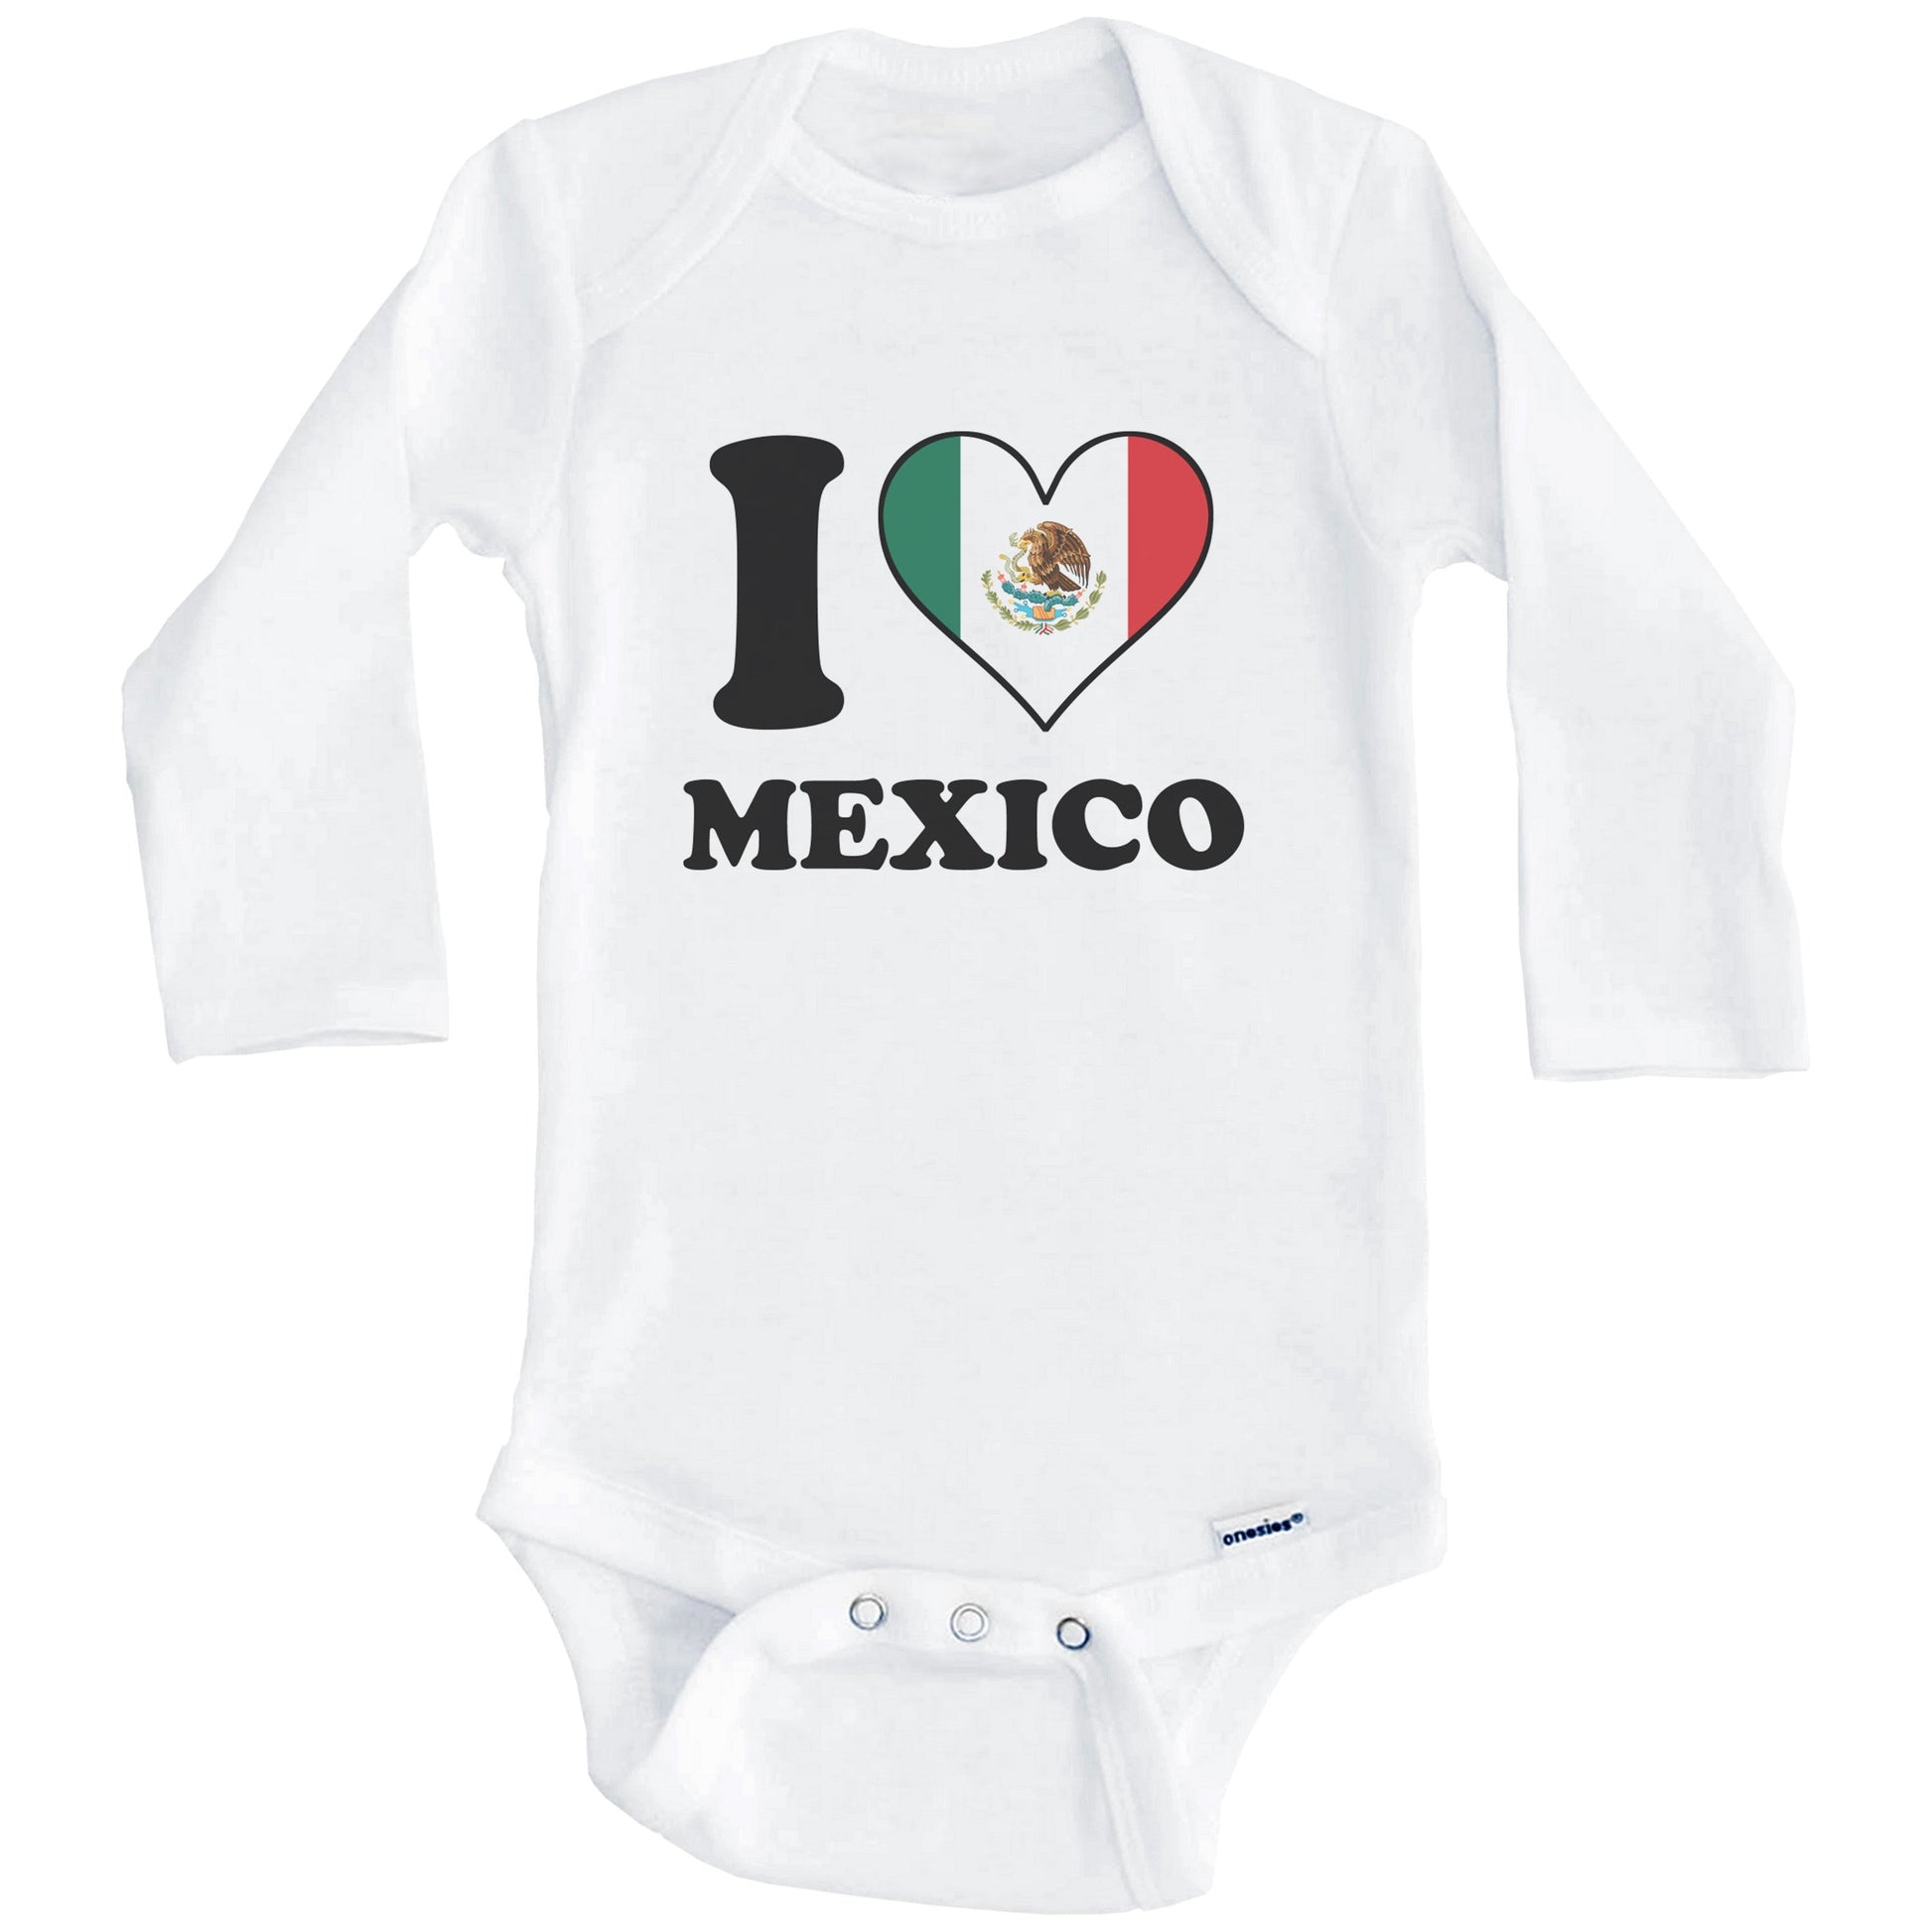 I Love Mexico Mexican Flag Heart Baby Onesie (Long Sleeves)